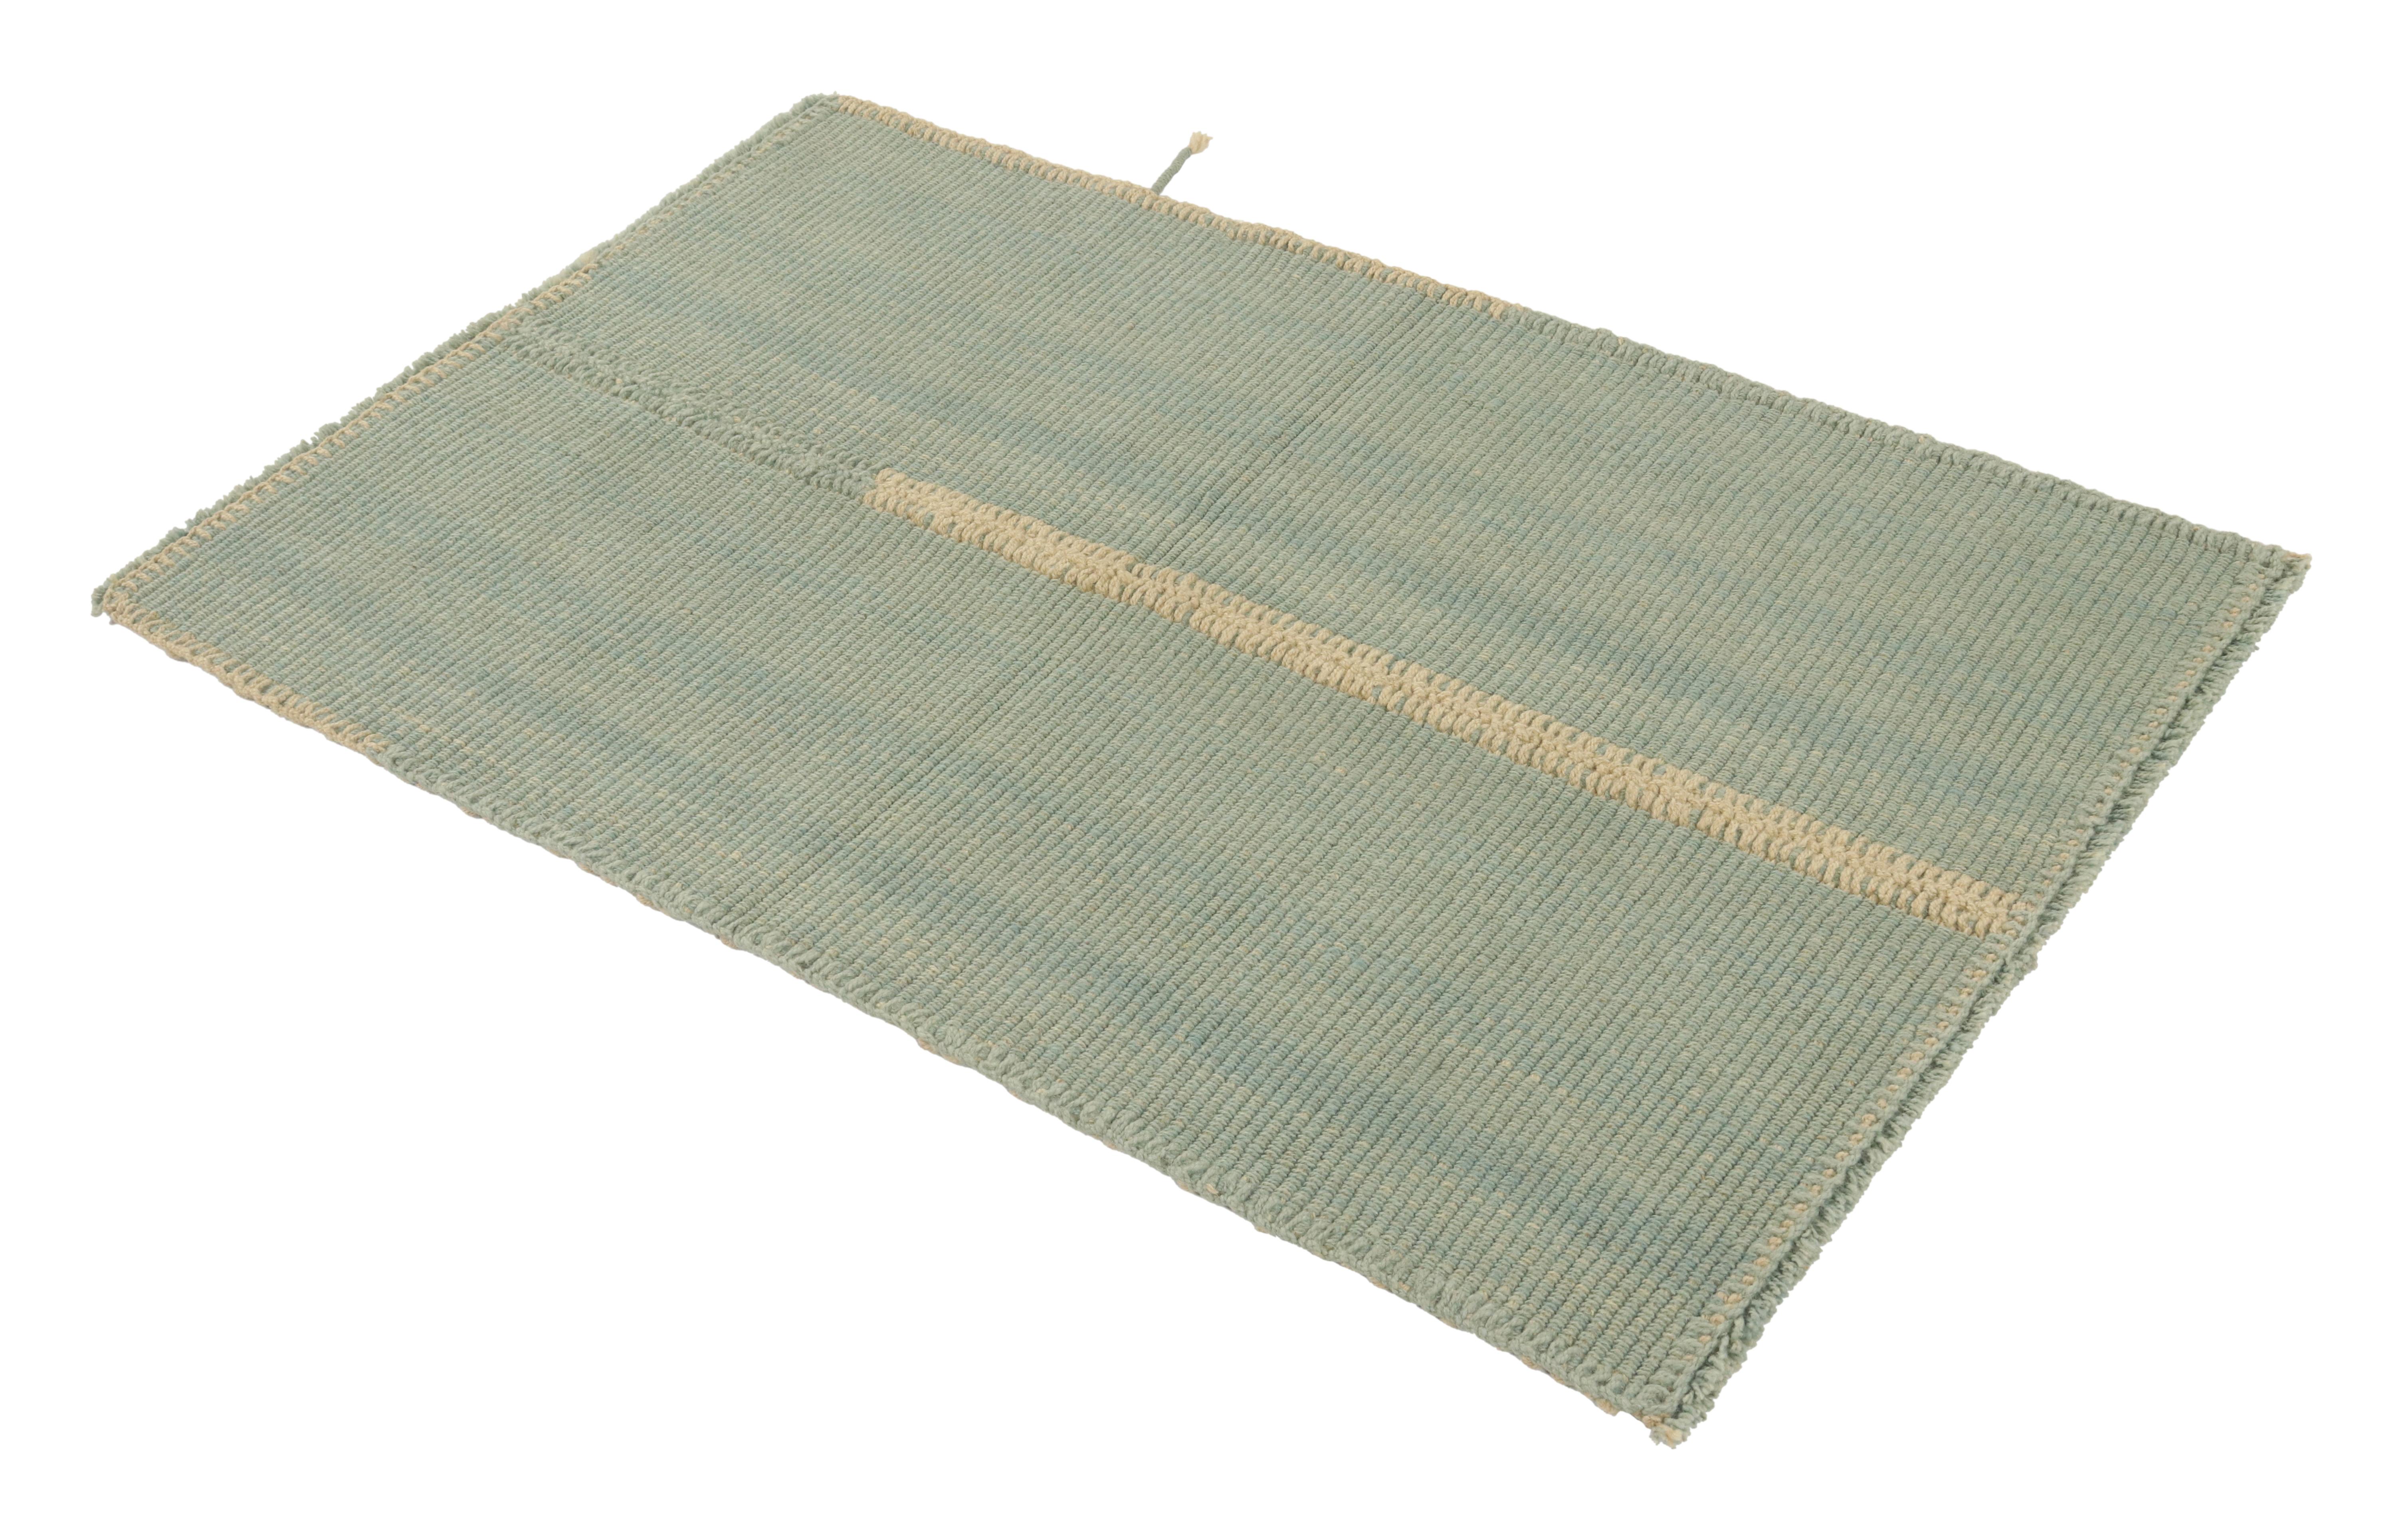 Handwoven in wool, a gift-sized 3x4 Kilim from an innovative new contemporary flat weave collection by Rug & Kilim.
On the Design:
The “Rez Kilim” connotes a modern take on classic panel weaving—this edition enjoying seafoam blue and off-white